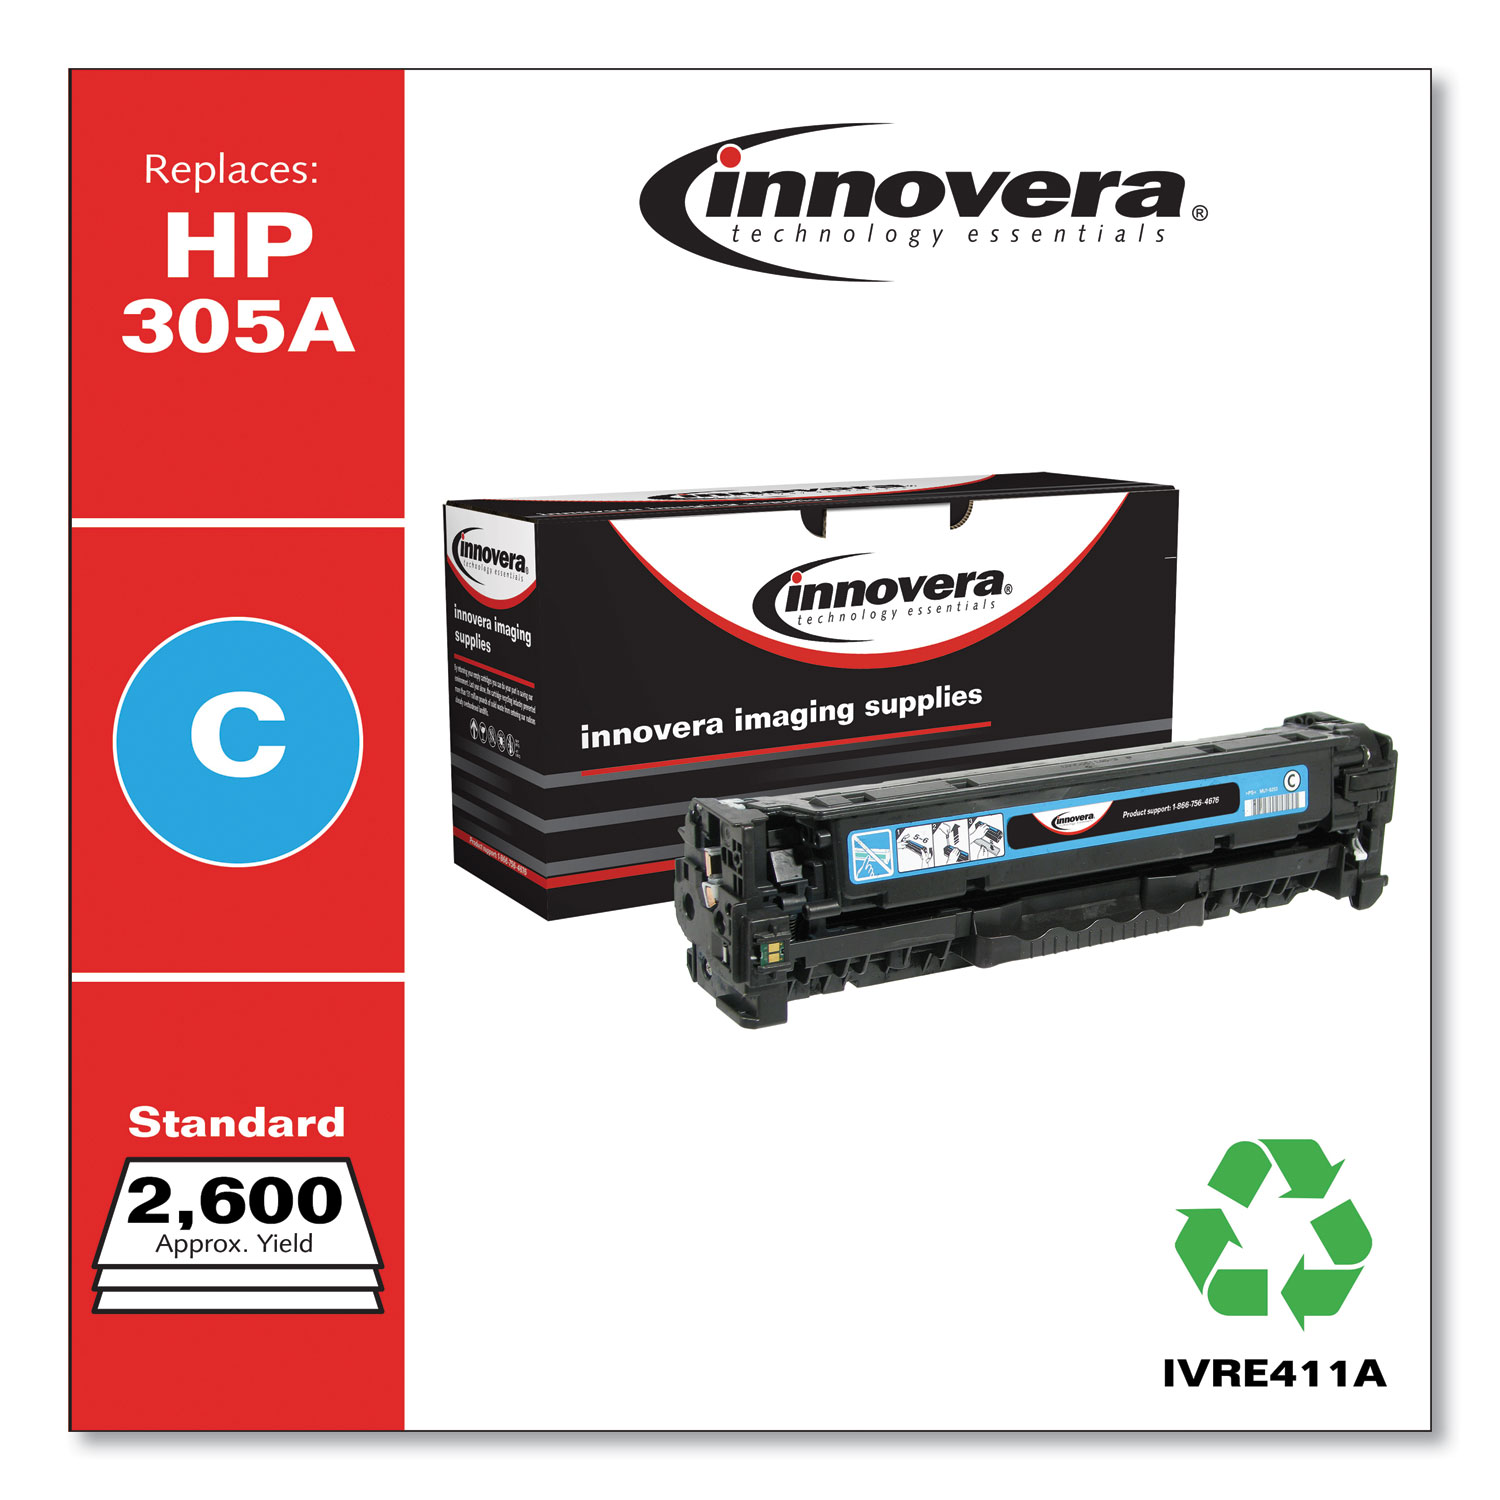  Innovera IVRE411A Remanufactured CE411A (305A) Toner, 2600 Page-Yield, Cyan (IVRE411A) 